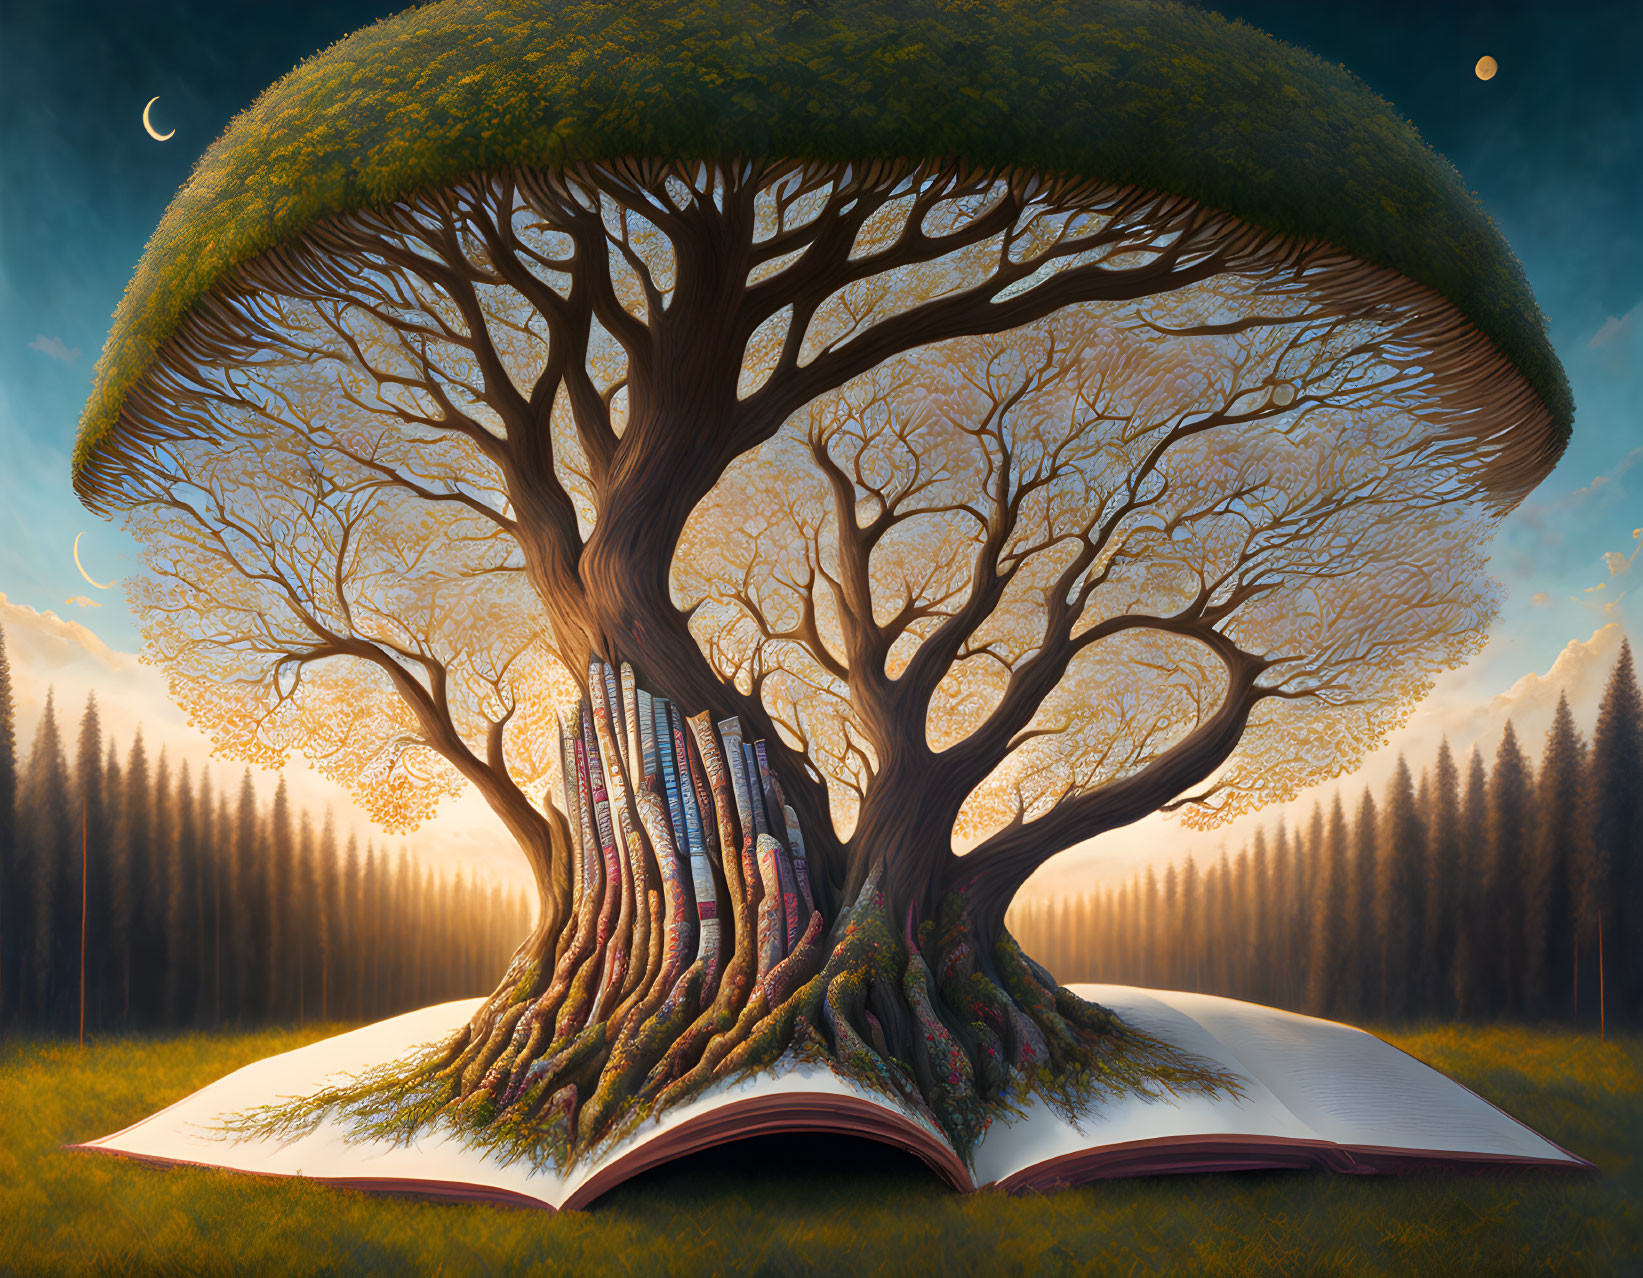 giant tree growing out of a book,